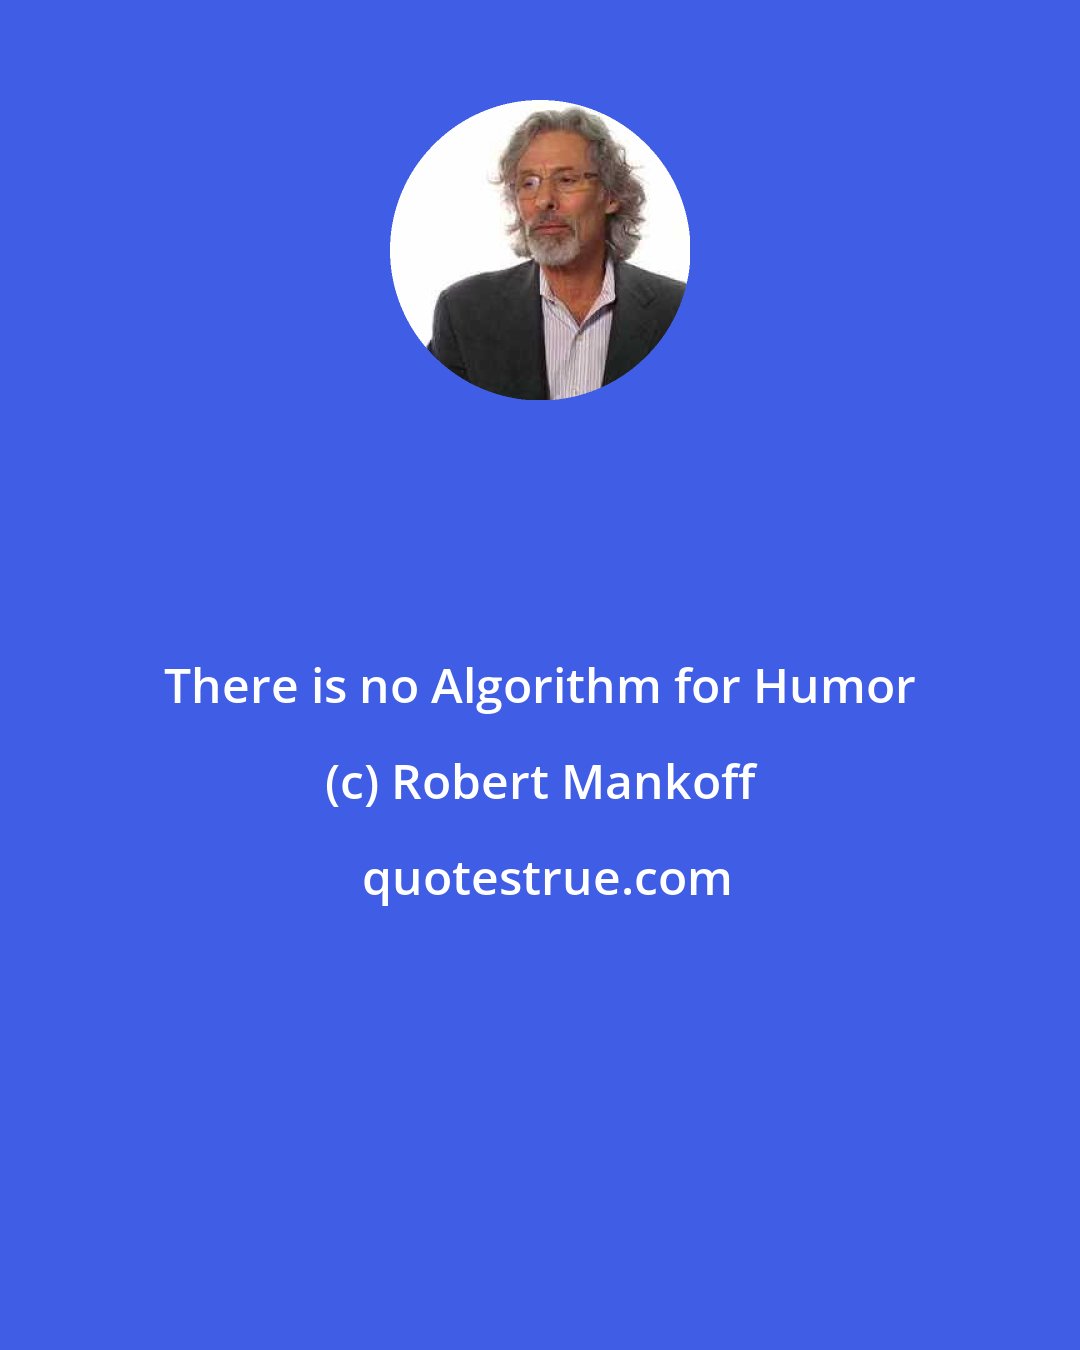 Robert Mankoff: There is no Algorithm for Humor